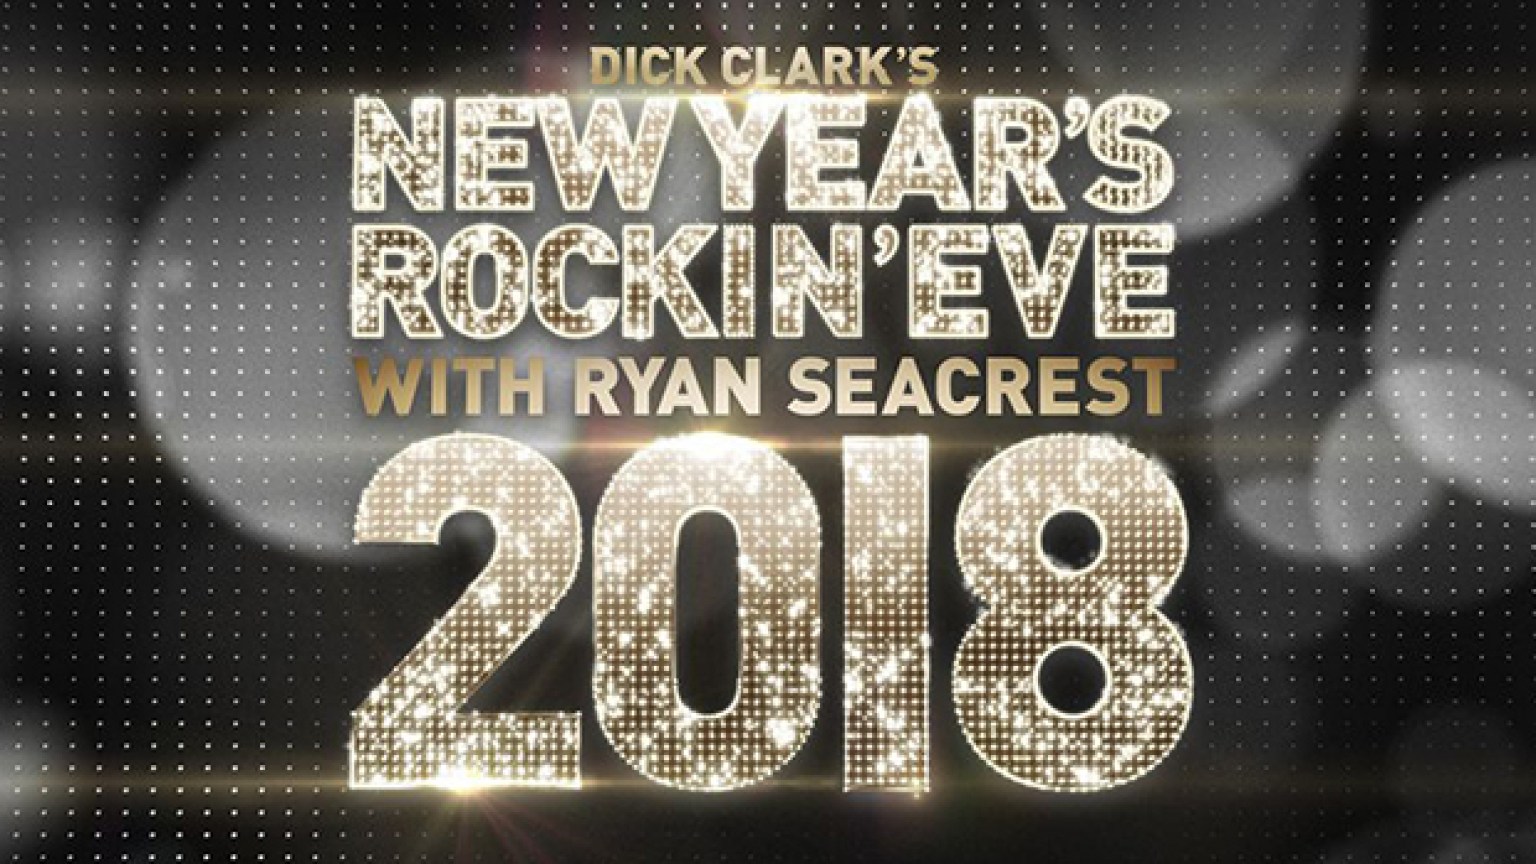 Dick Clark’s New Year’s Rockin’ Eve Live Stream Watch The 2018 Event